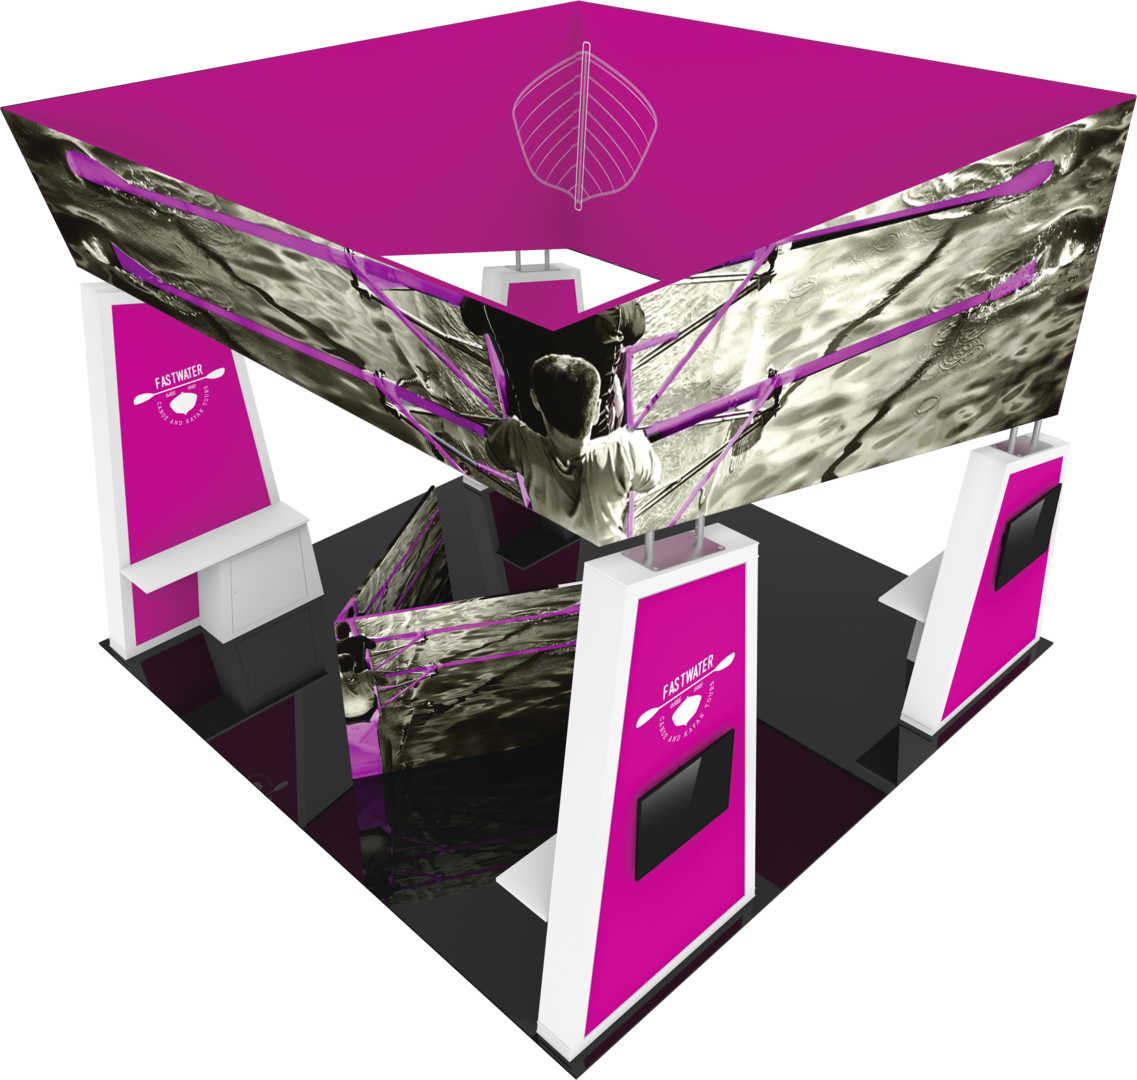 20ft x 20ft Formulate Fusion Island Booth Kit 11 Fabric Tower (Hardware Only)